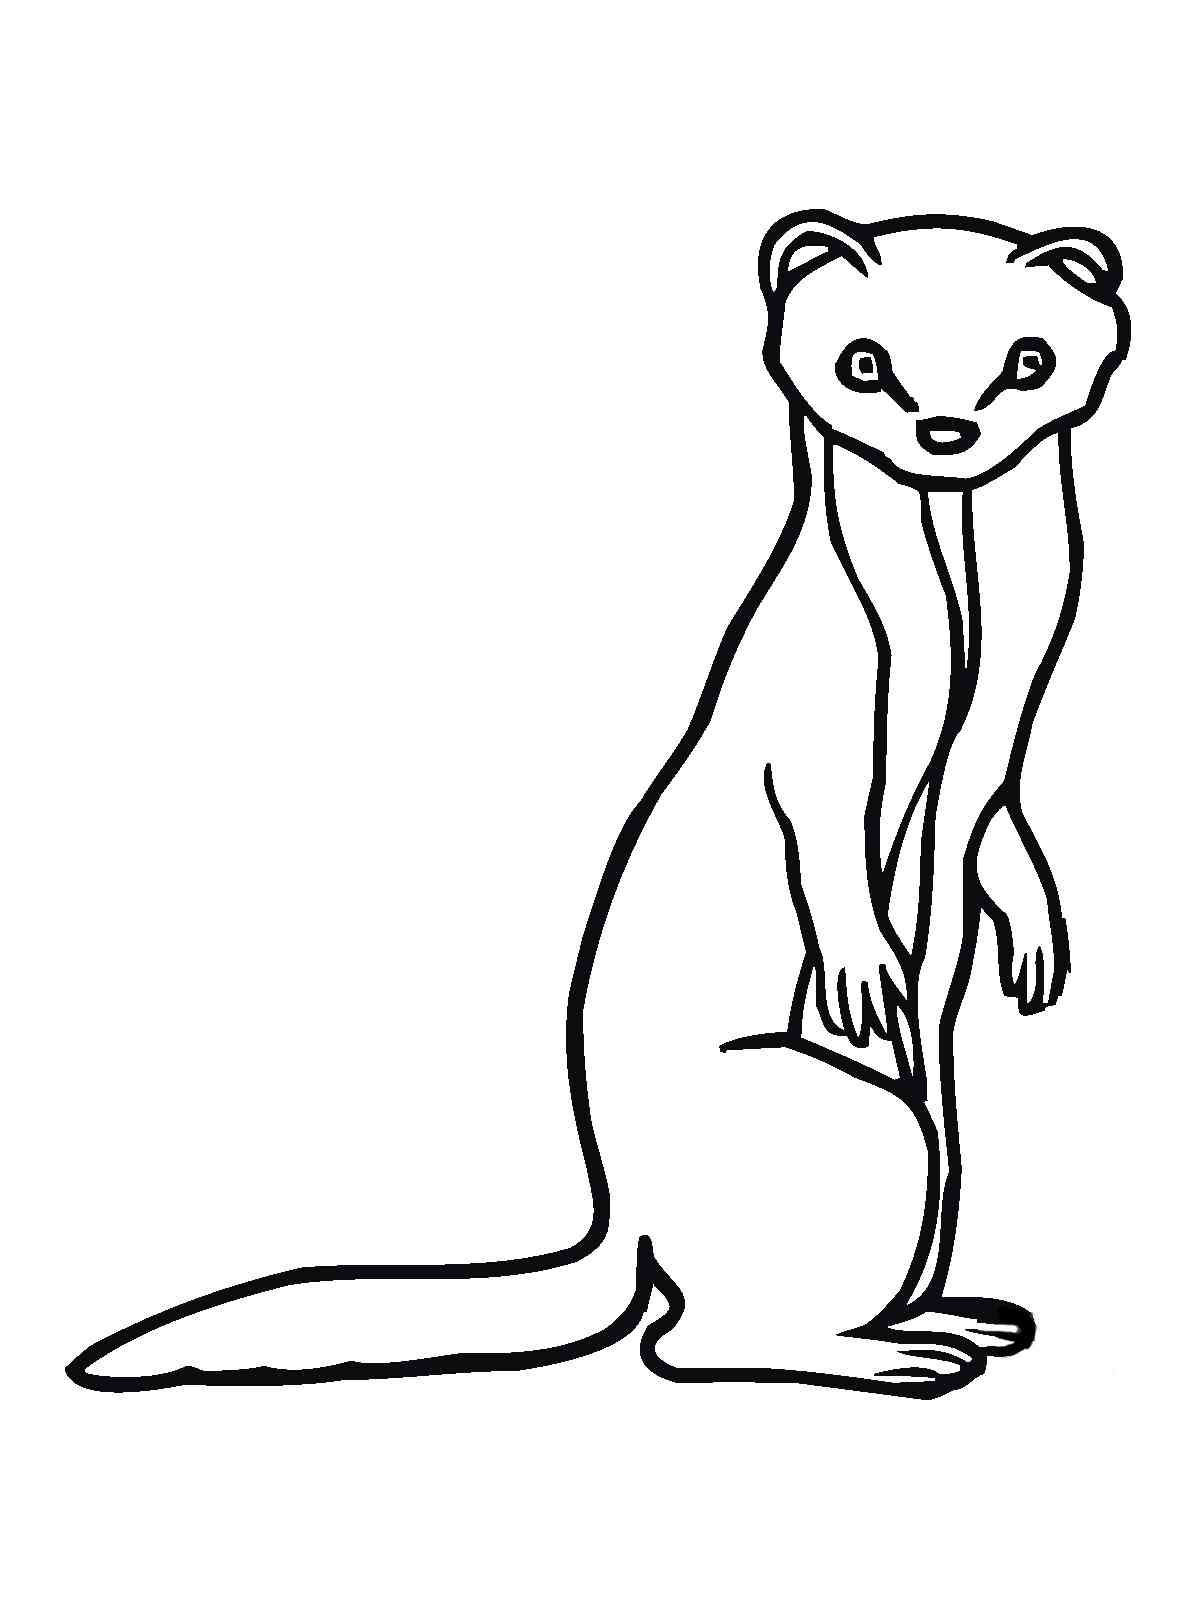 Marten Standing coloring page